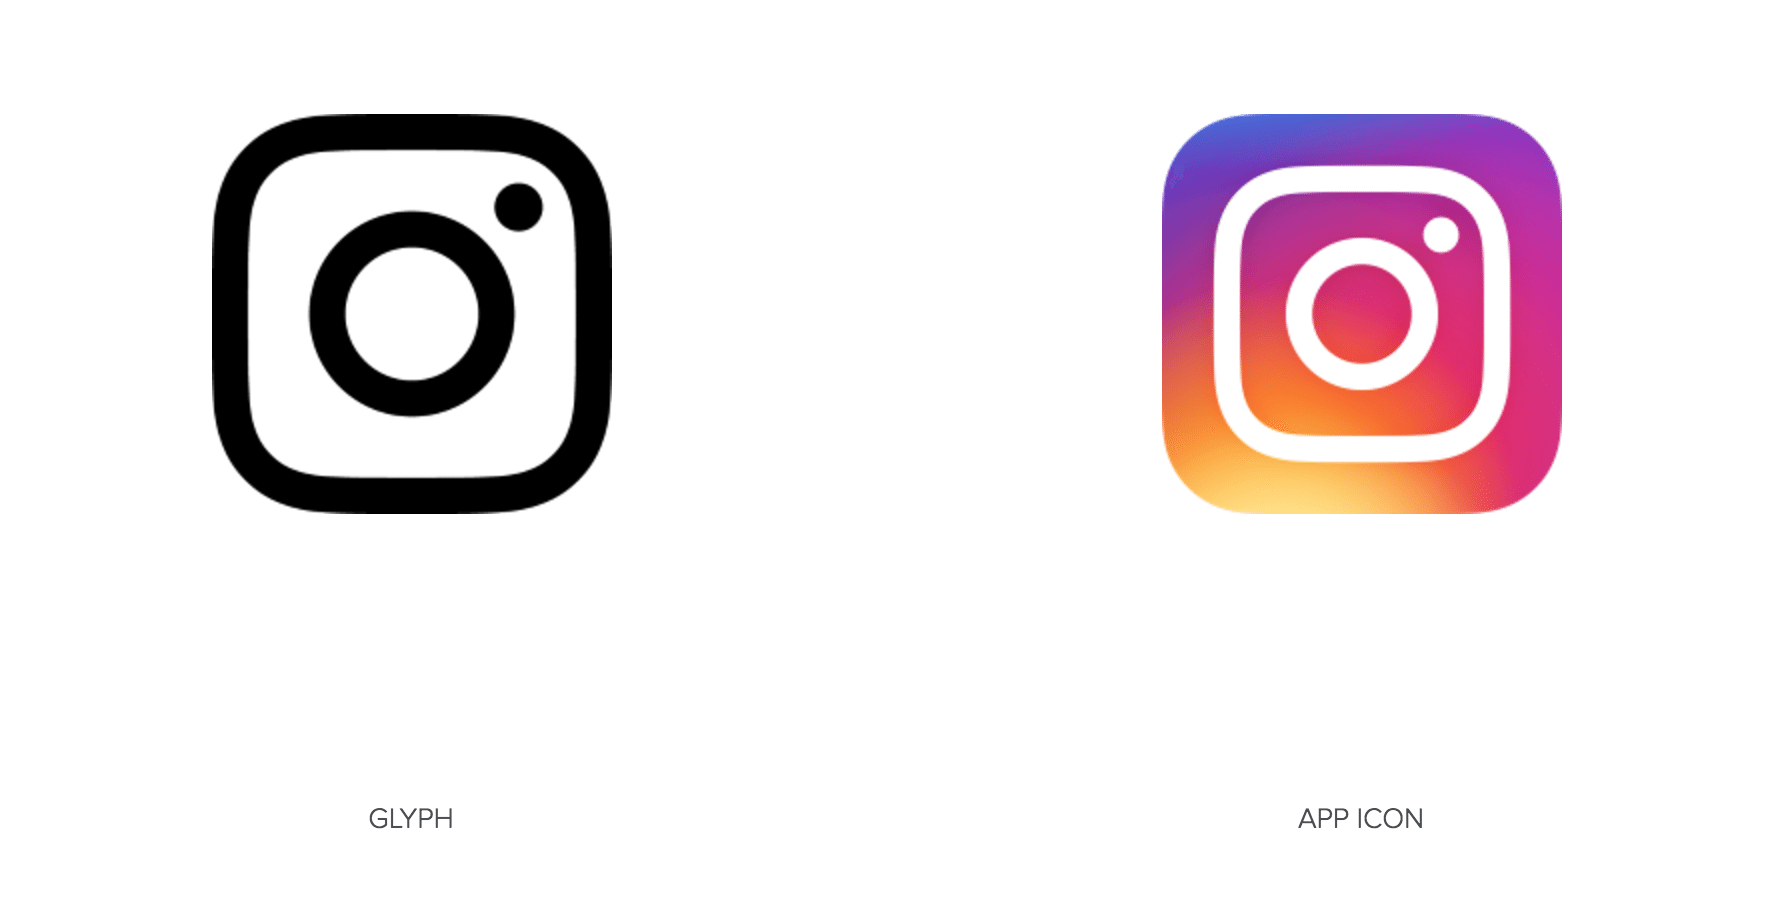 Instagram Logo - Every Social Media Logo You May Want [Free Resource]